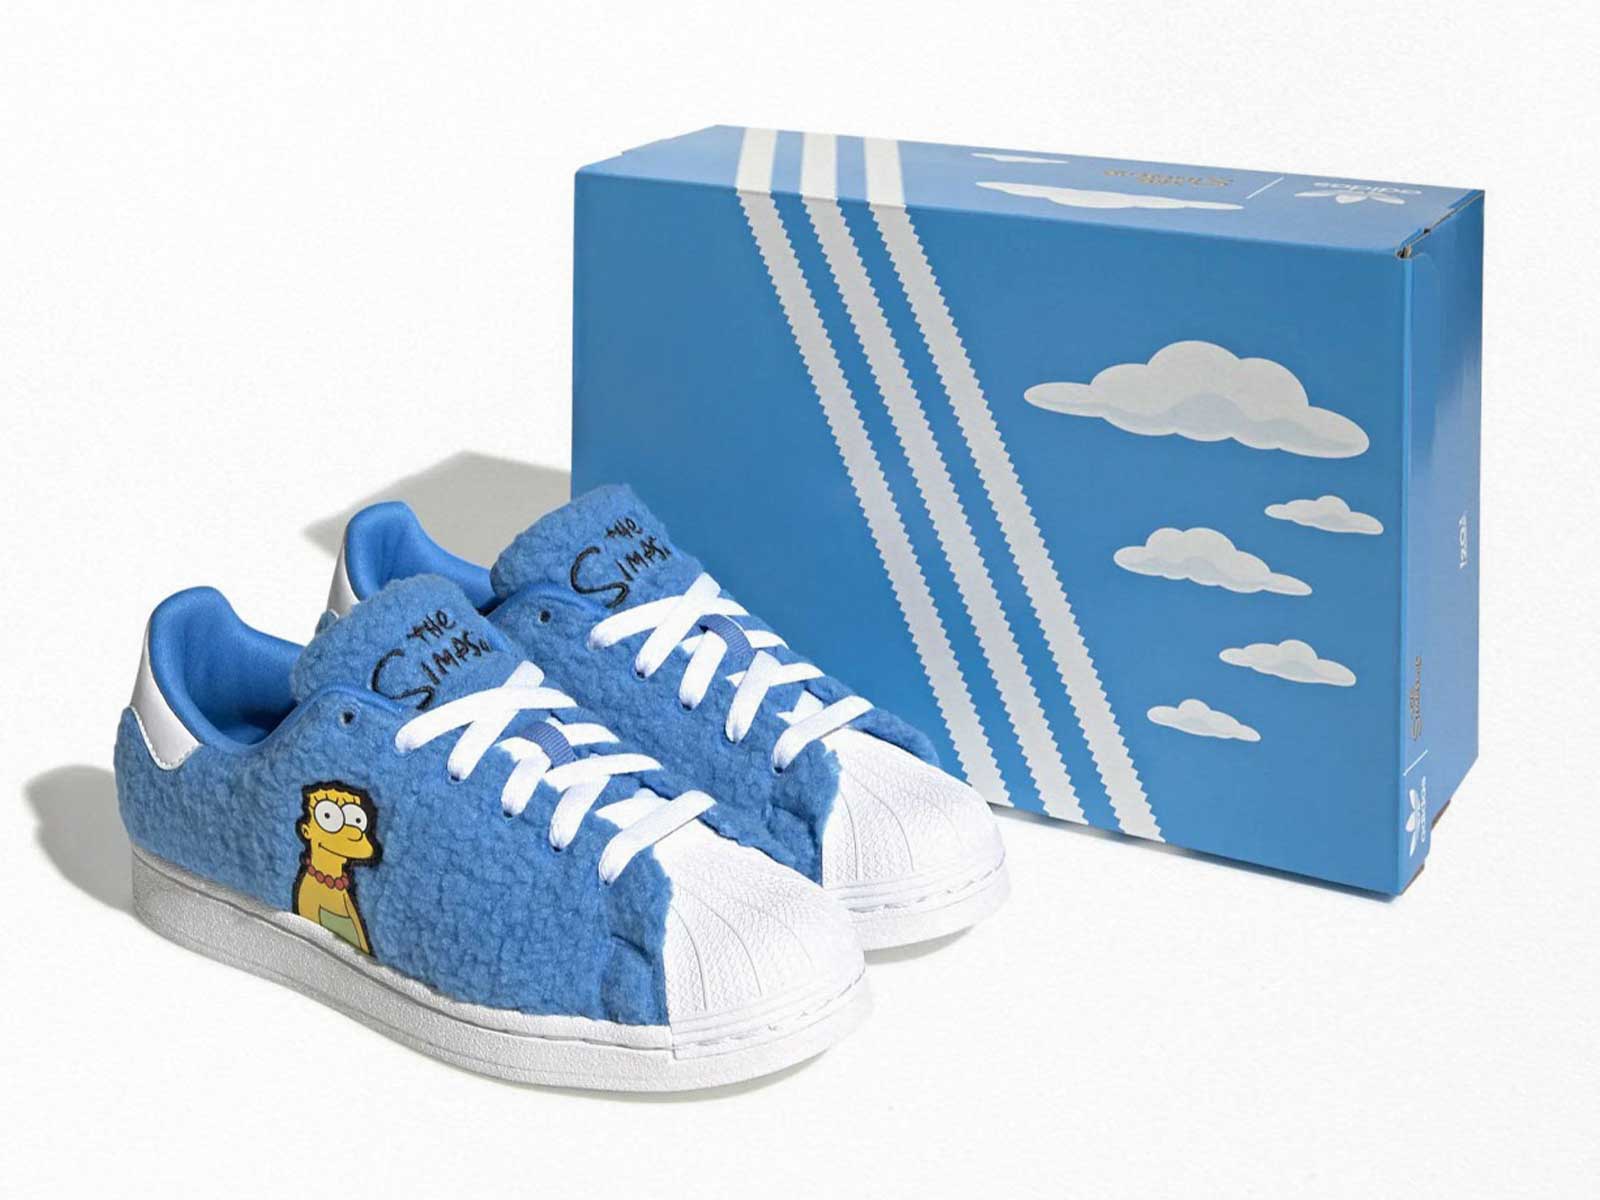 Marge Simpson gets her hands on the adidas Superstars